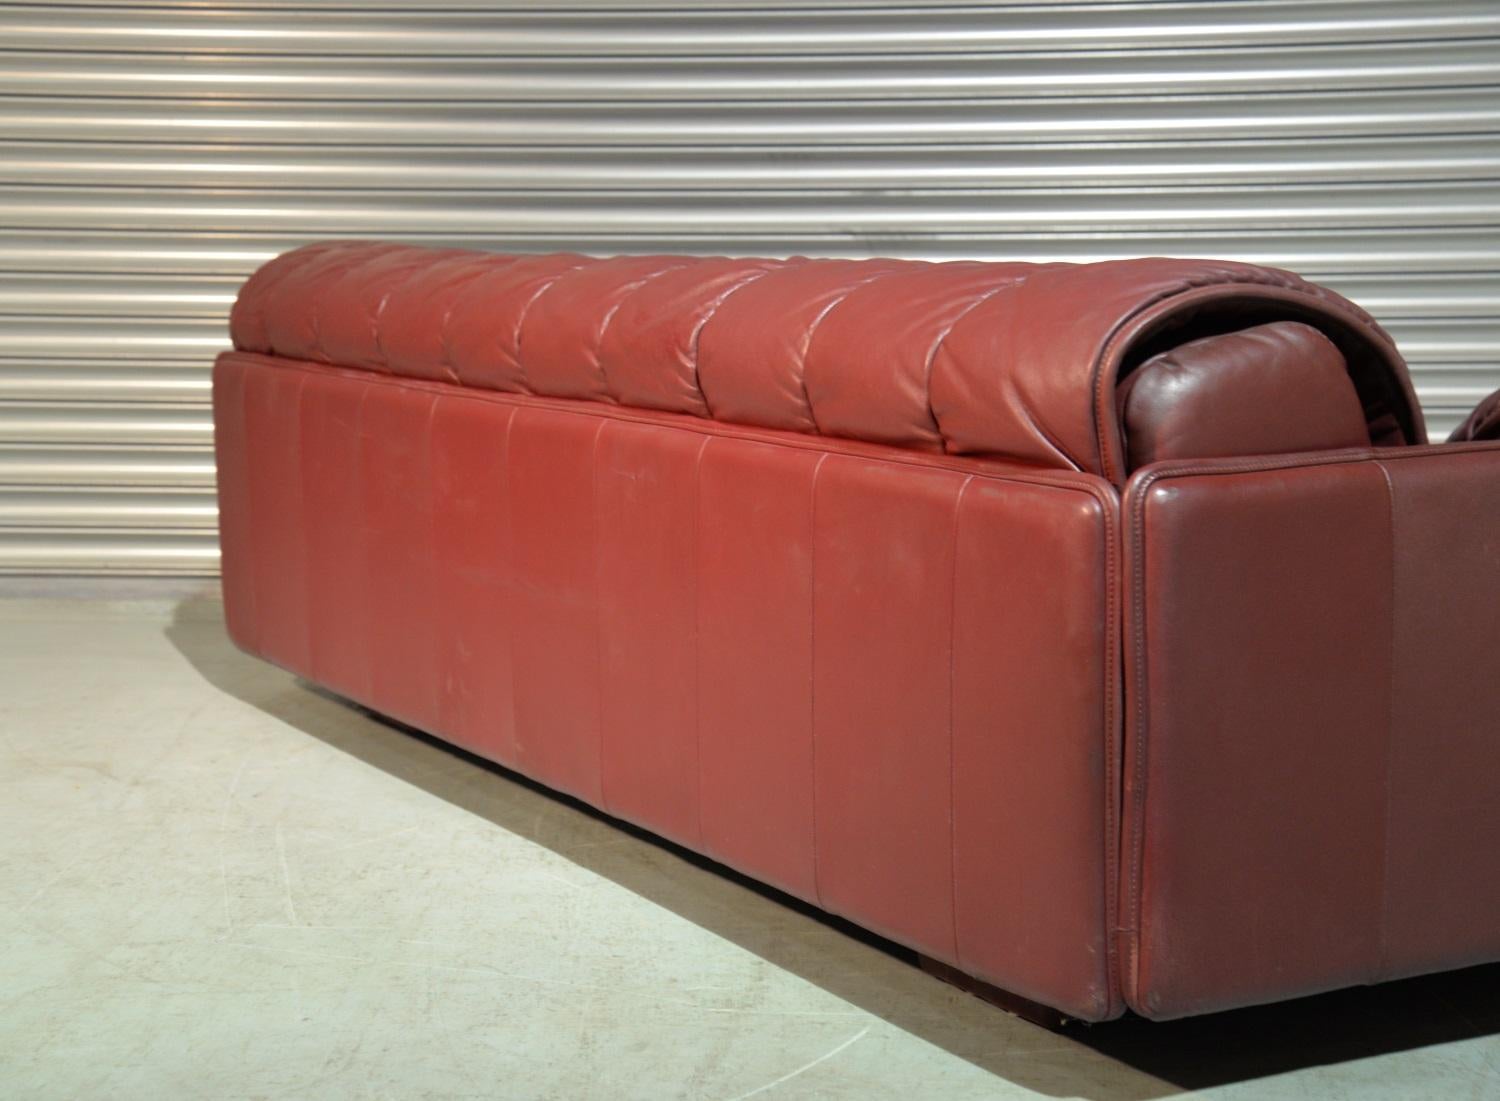 Late 20th Century Vintage De Sede Patchwork Leather Sofa or Daybed, Switzerland, 1970s For Sale